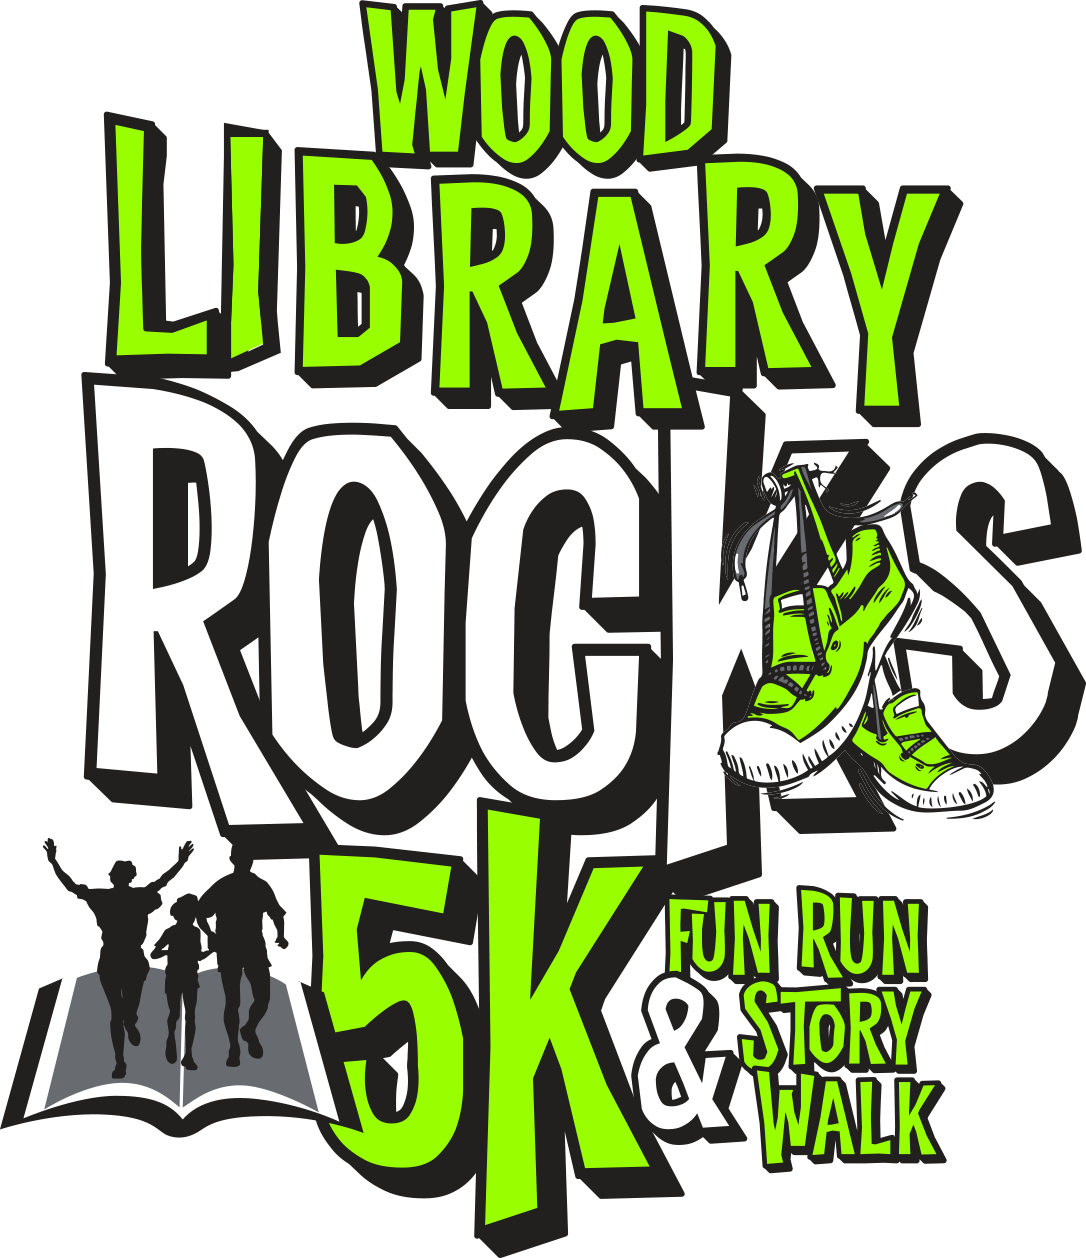 5k, Fun Run And Story Walk Support Summer Reading - Graphic Design (1086x1258)